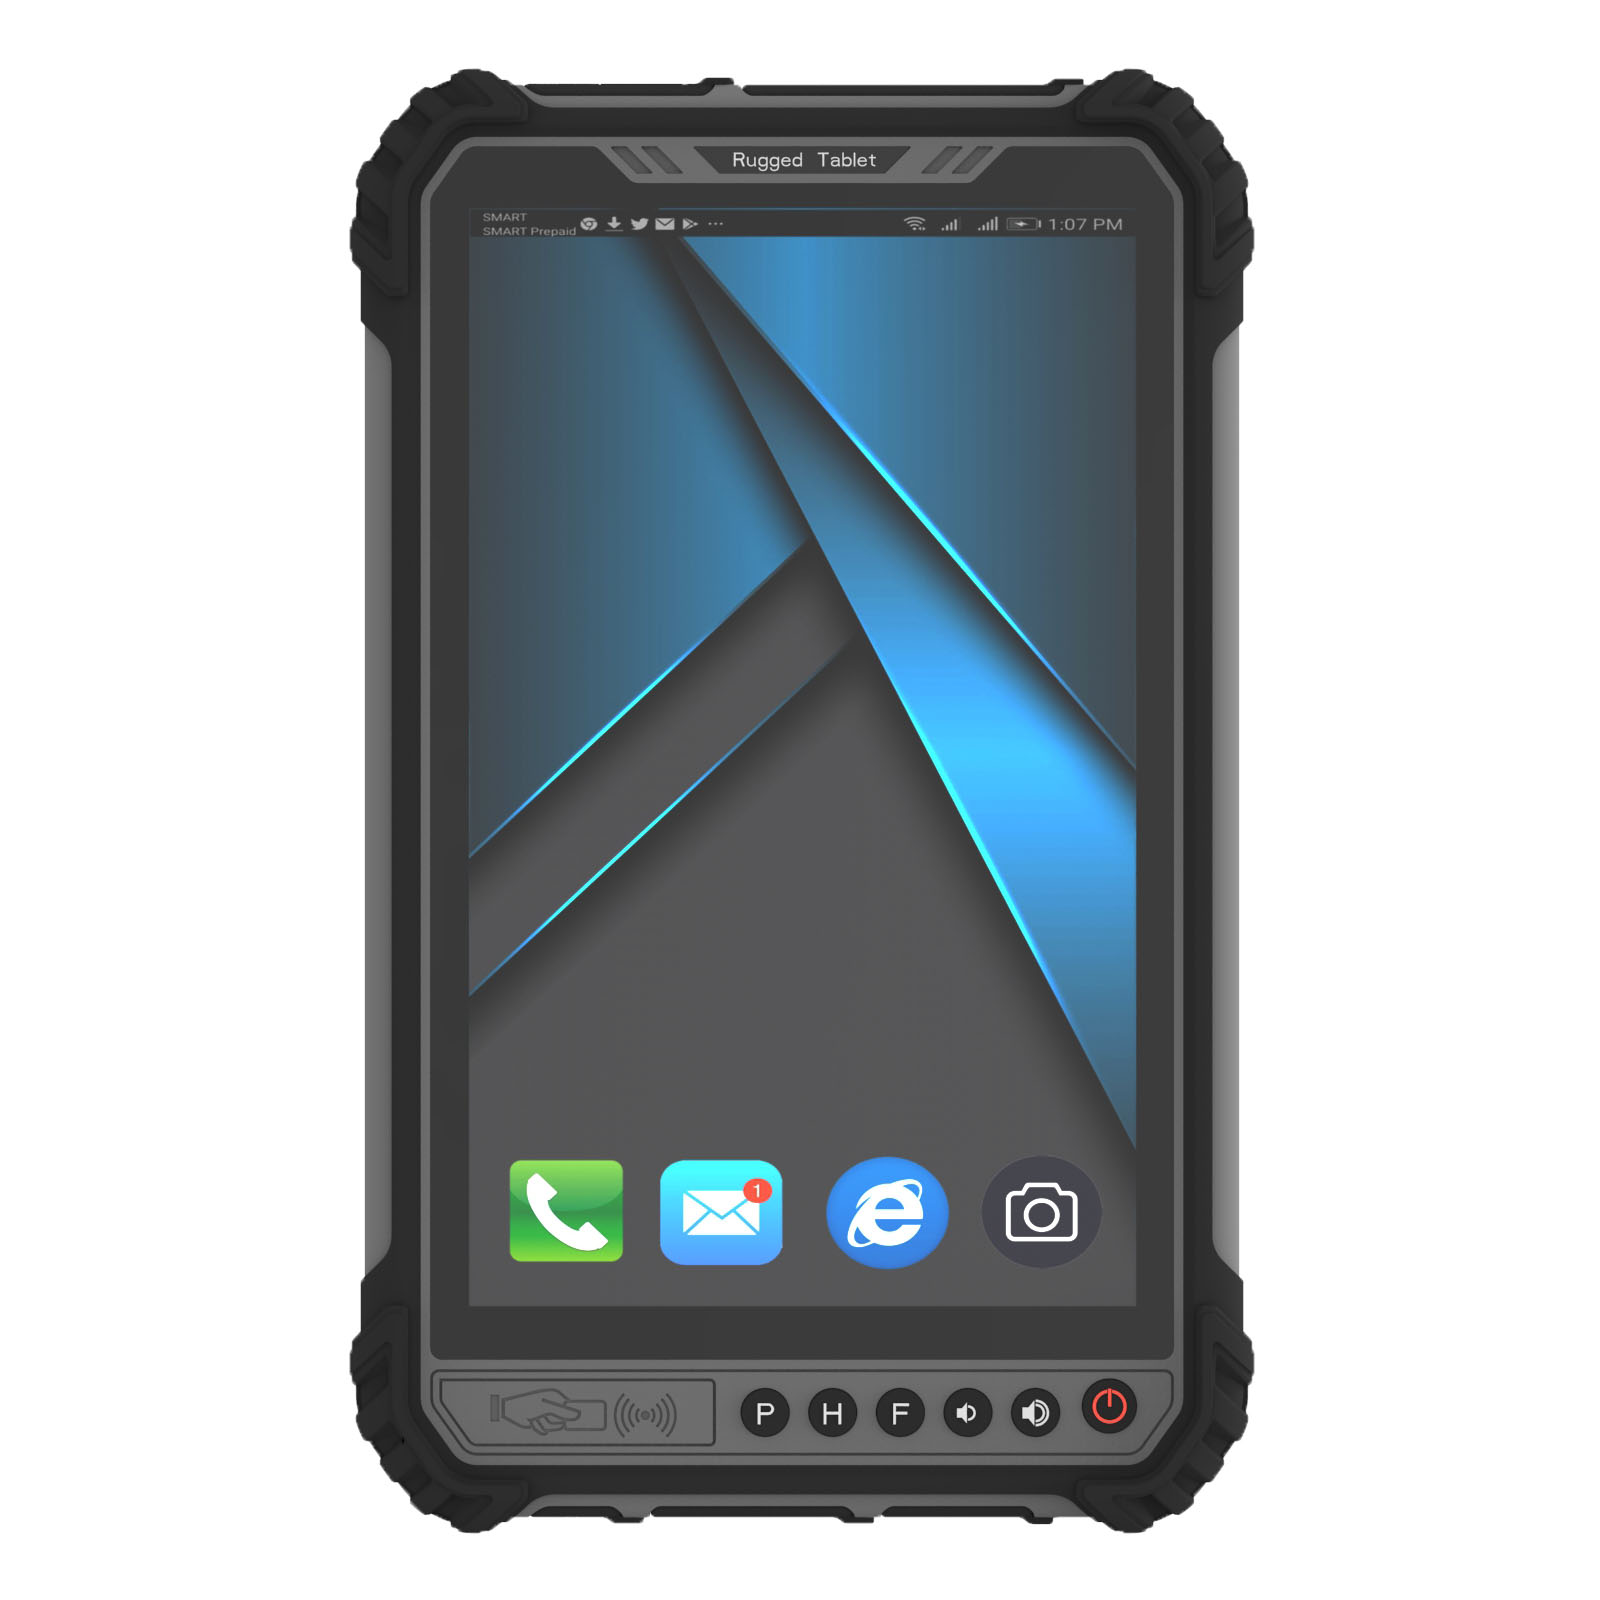 ST9-A5 new arrive great rugged tablets